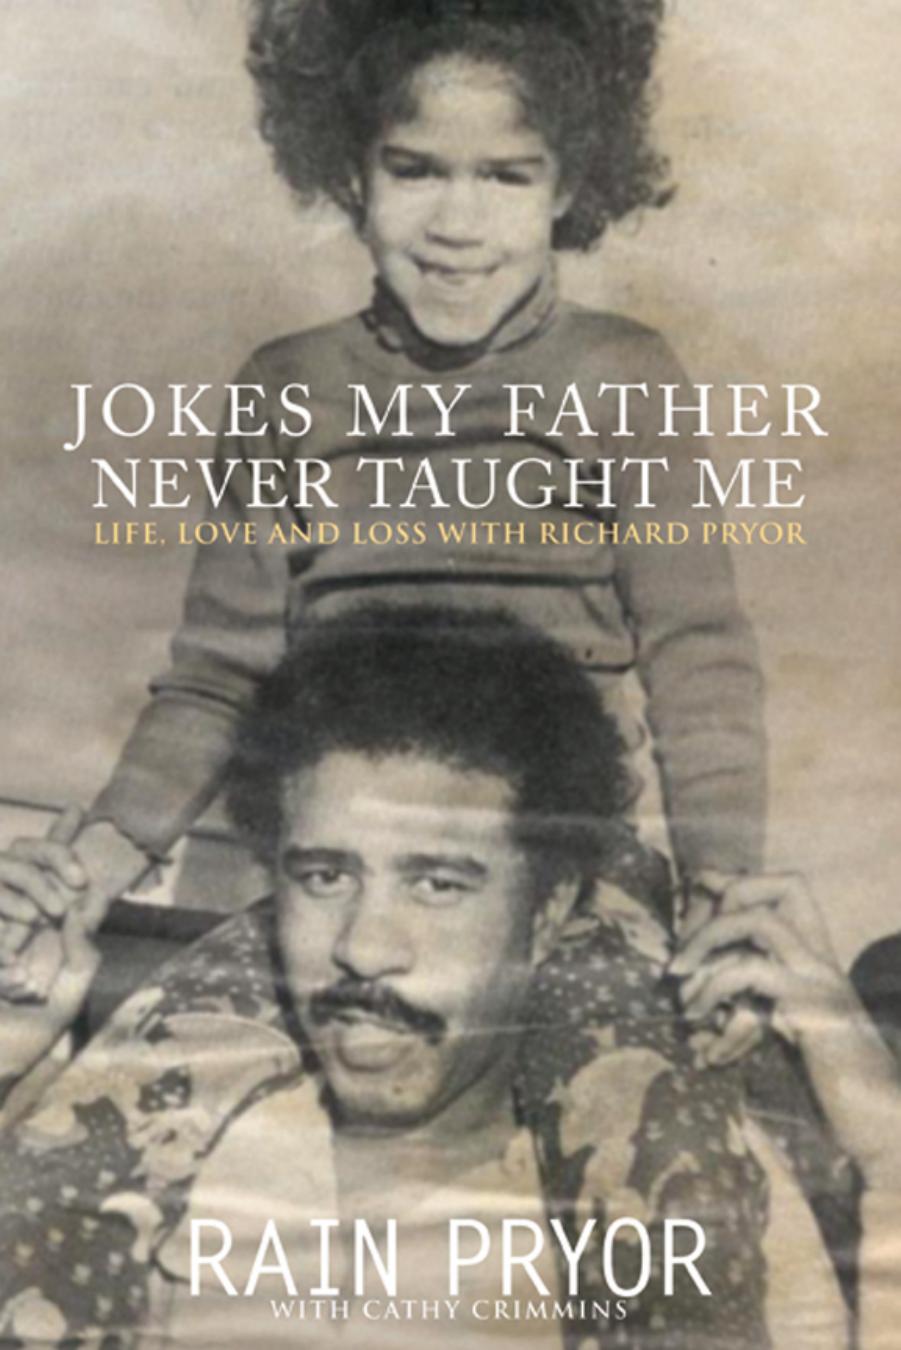 Jokes My Father Never Taught Me by Rain Pryor